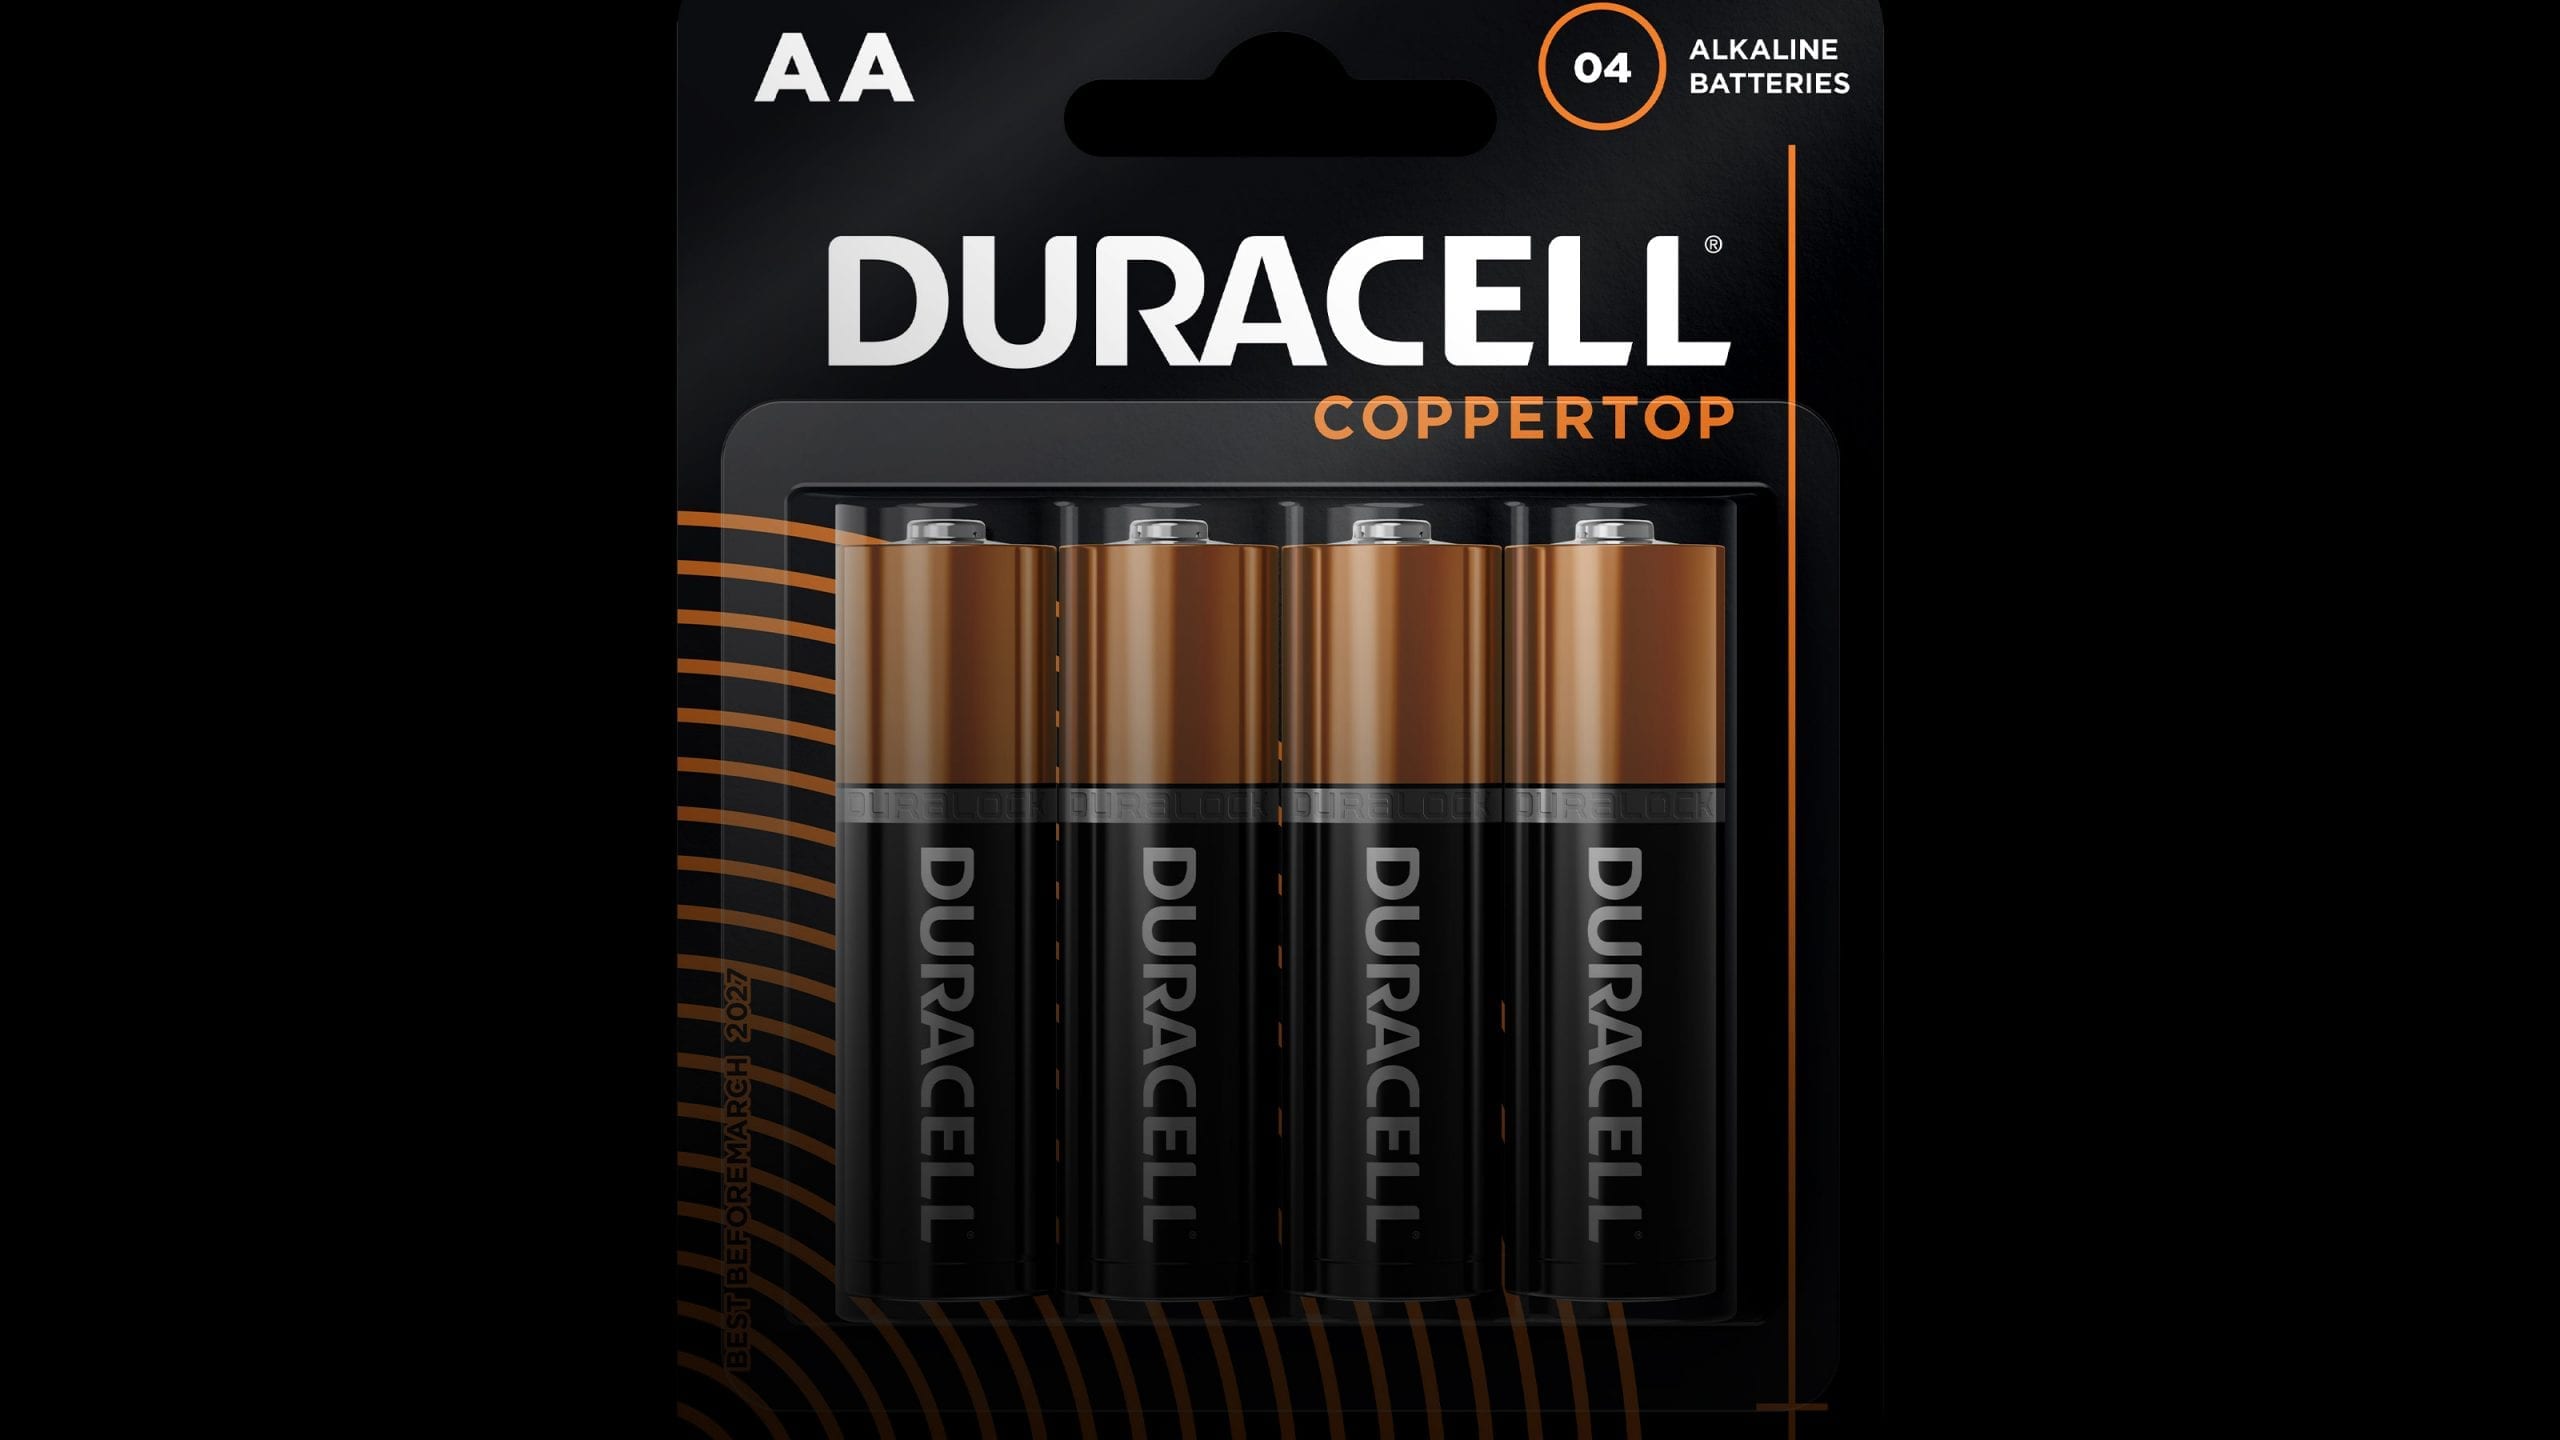 Duracell coppertop package design